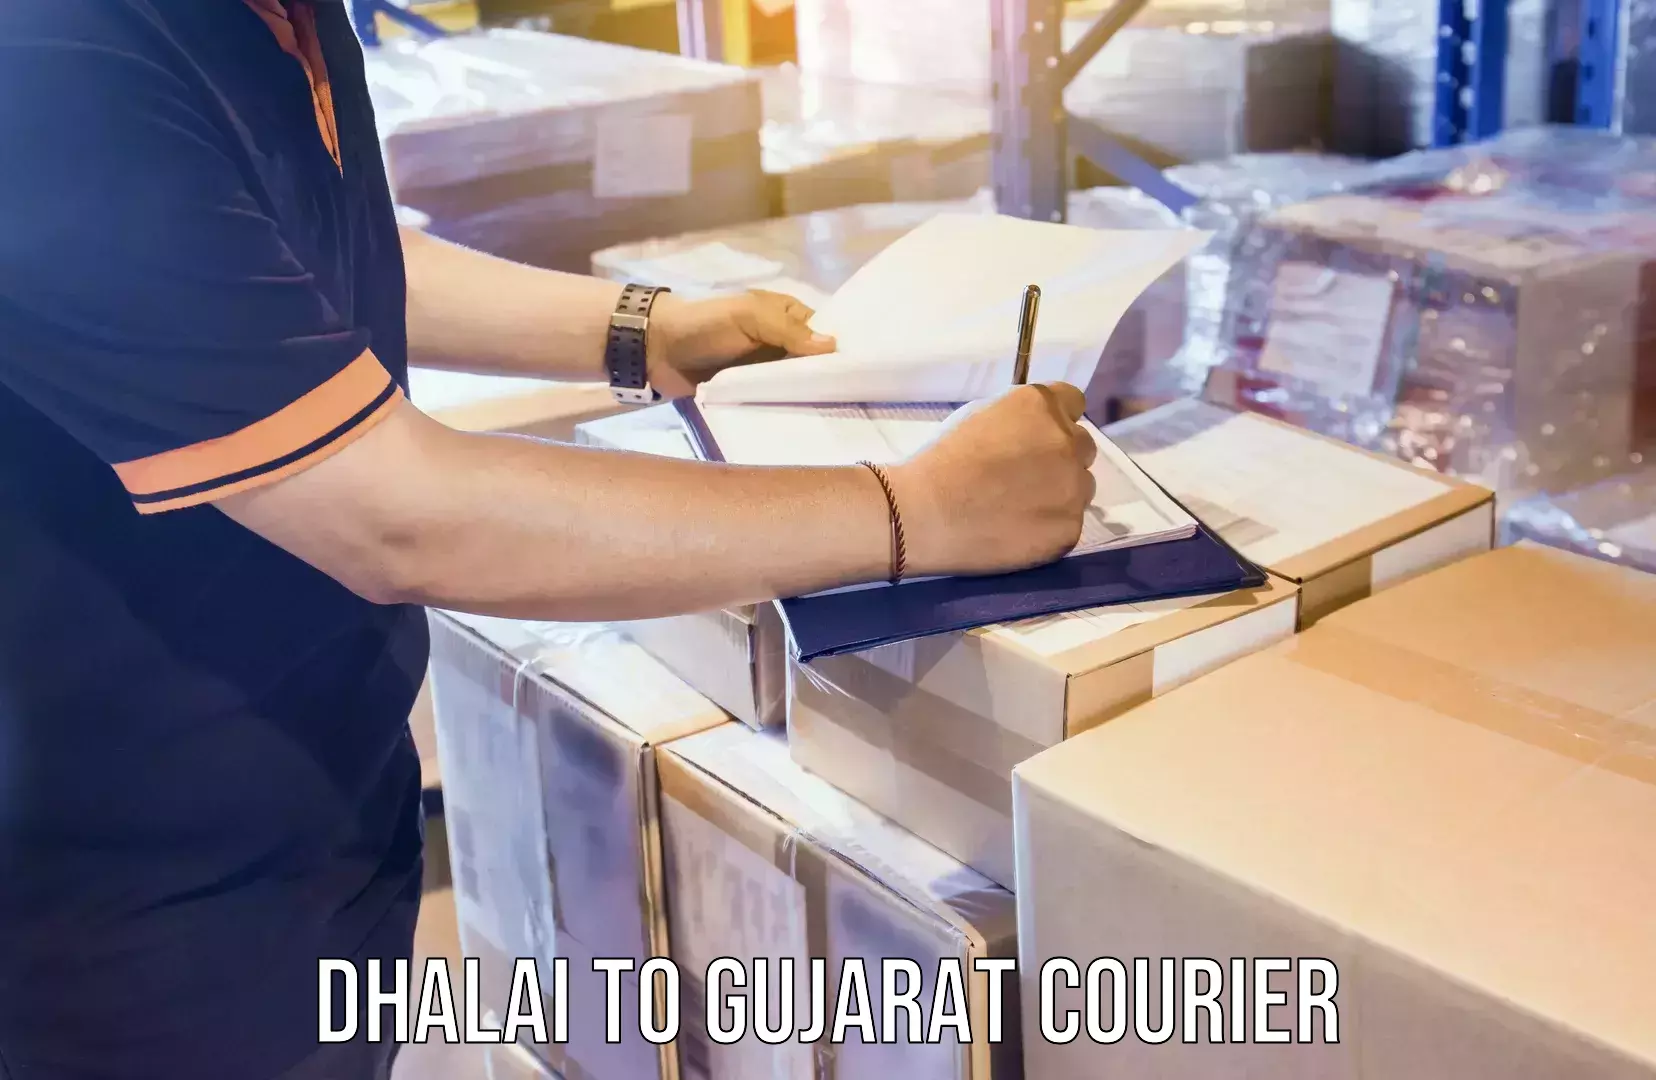 Courier service innovation Dhalai to Gujarat